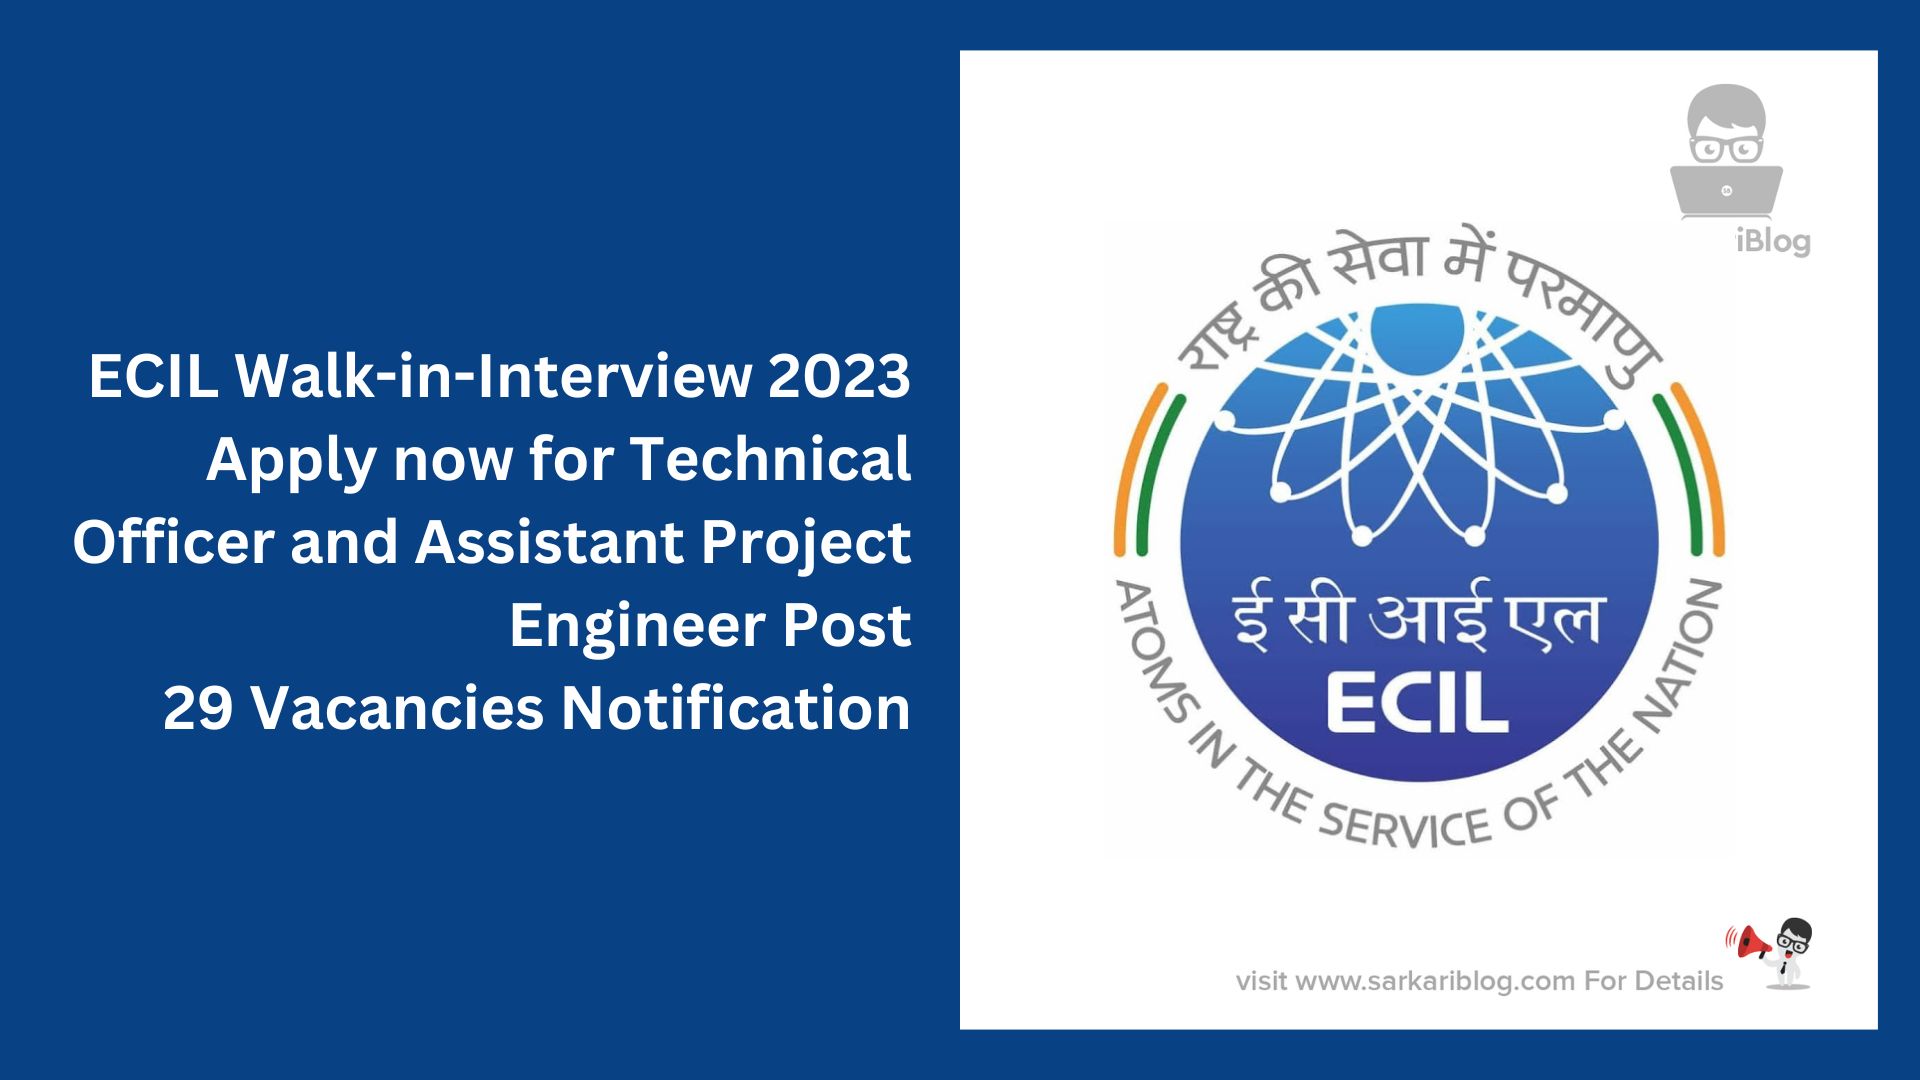 ECIL Walk-in-Interview 2023